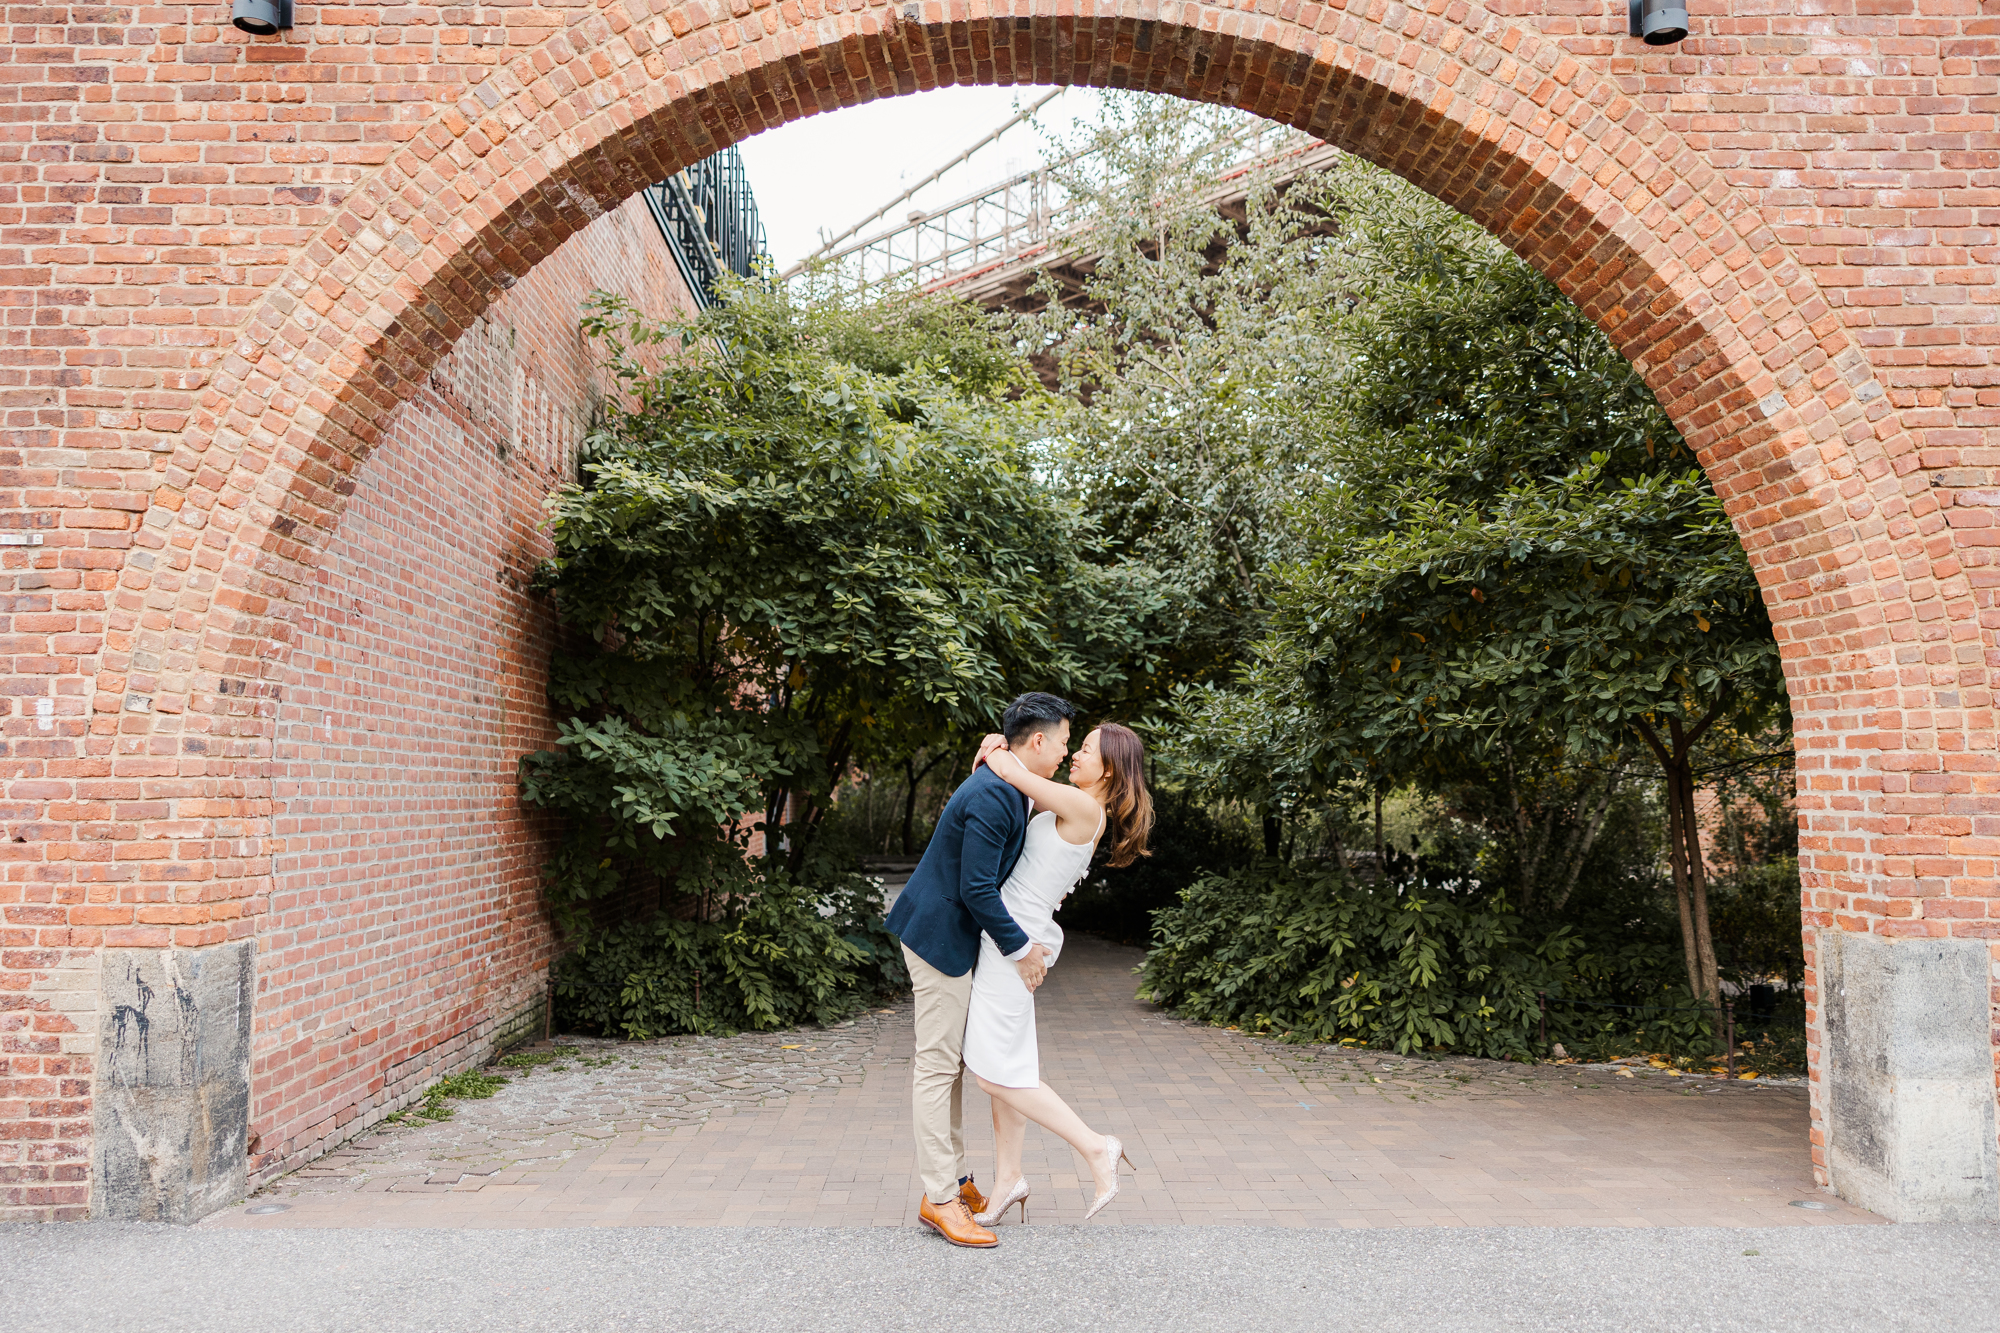 The Best Time of Year for Romantic DUMBO Engagement Photos